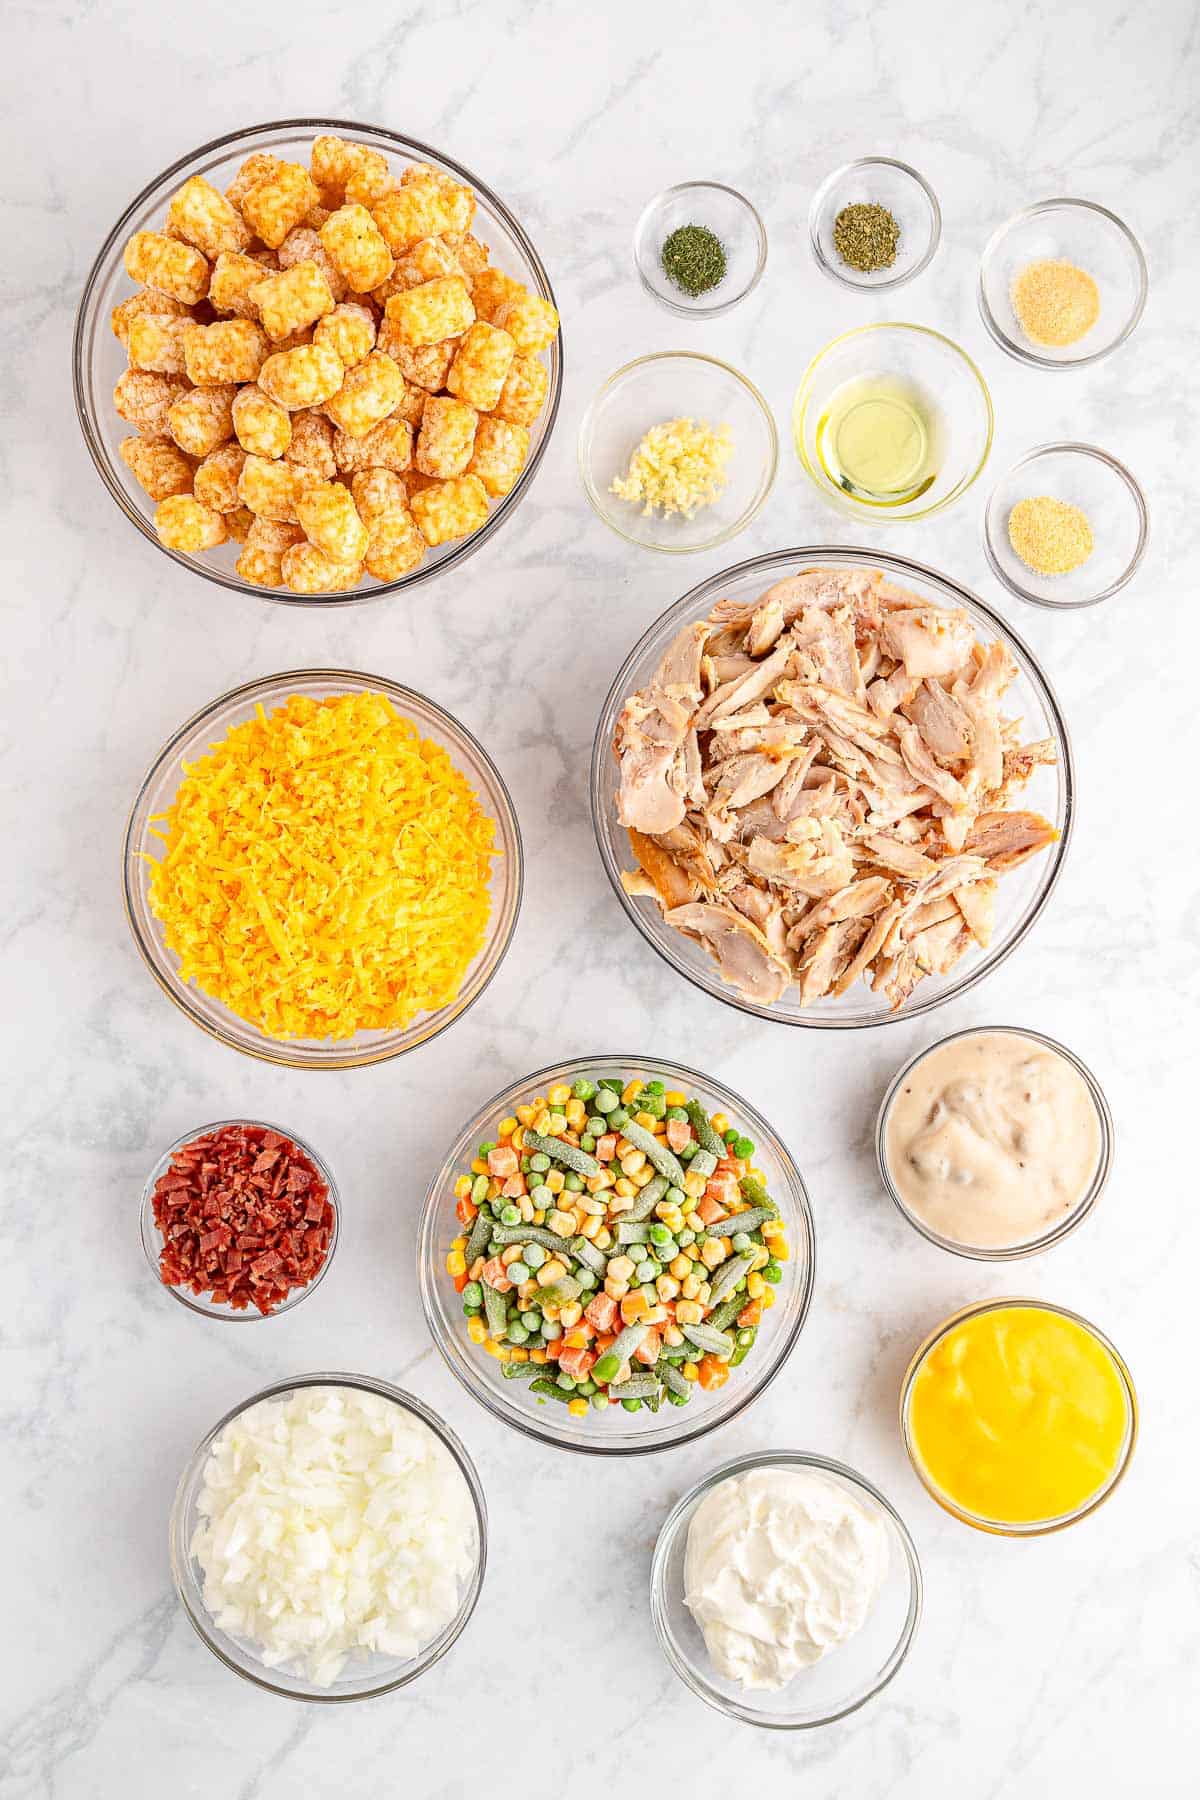 Ingredients needed to make easy cheesy chicken tater tot casserole.